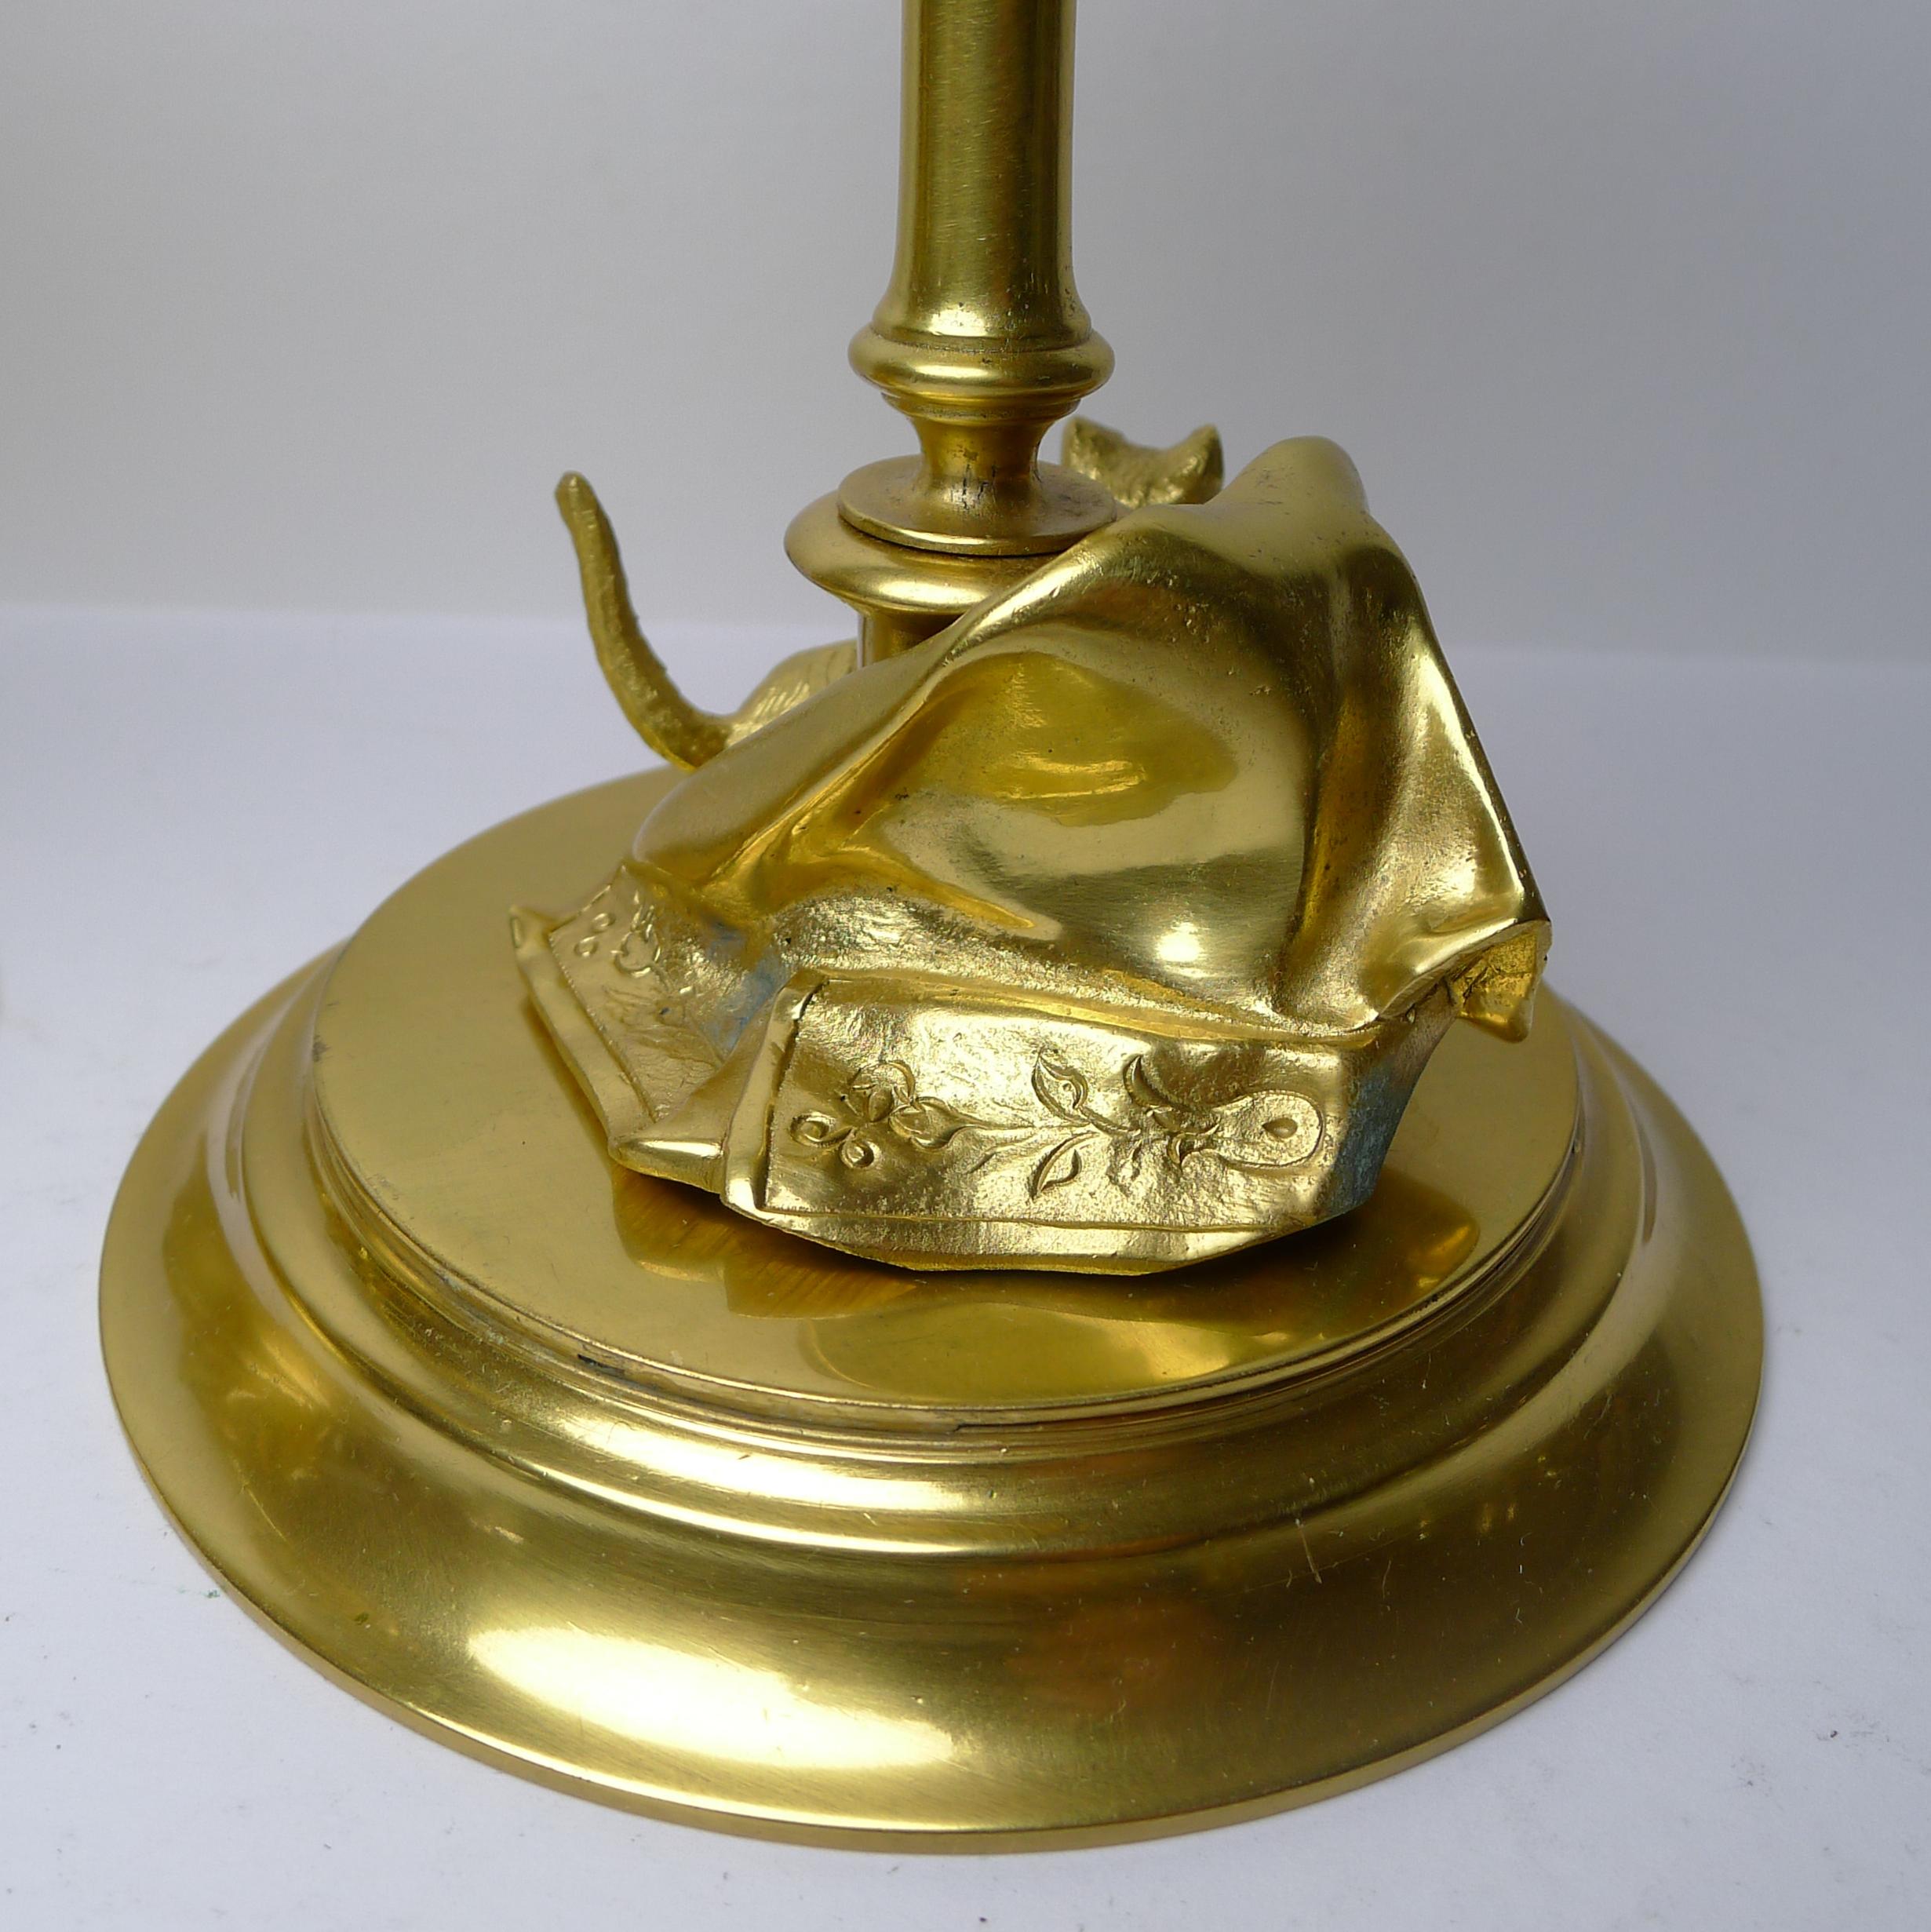 British Playing Cats or Kittens, Gilded Bronze Desk Set, c.1890 For Sale